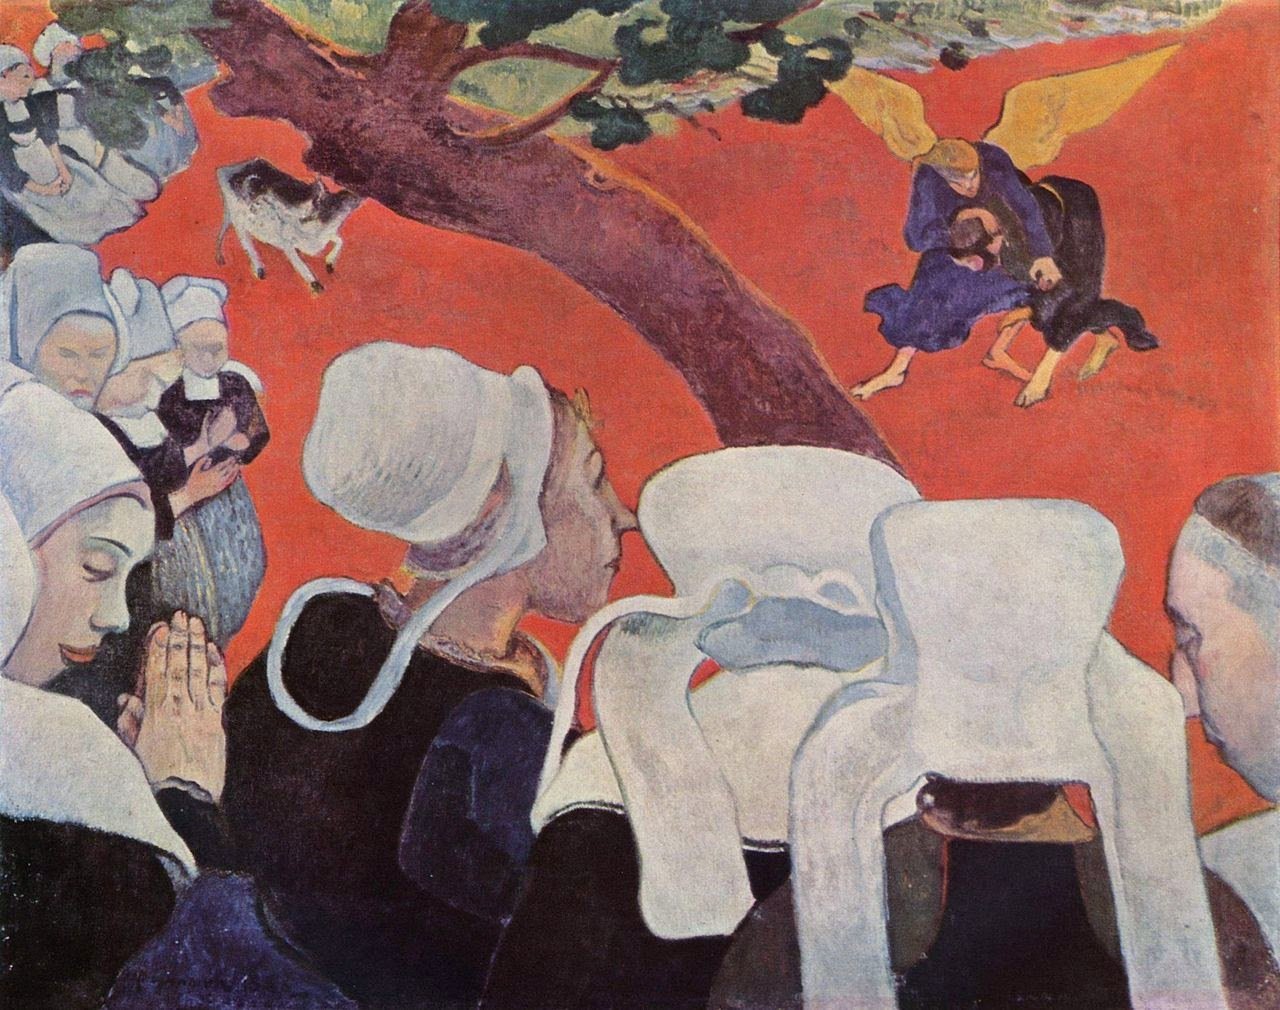 Paul Gauguin, Jacob wrestling with the angel, 73 × 92 cm, oil on canvas, 1888, Scottish National Gallery